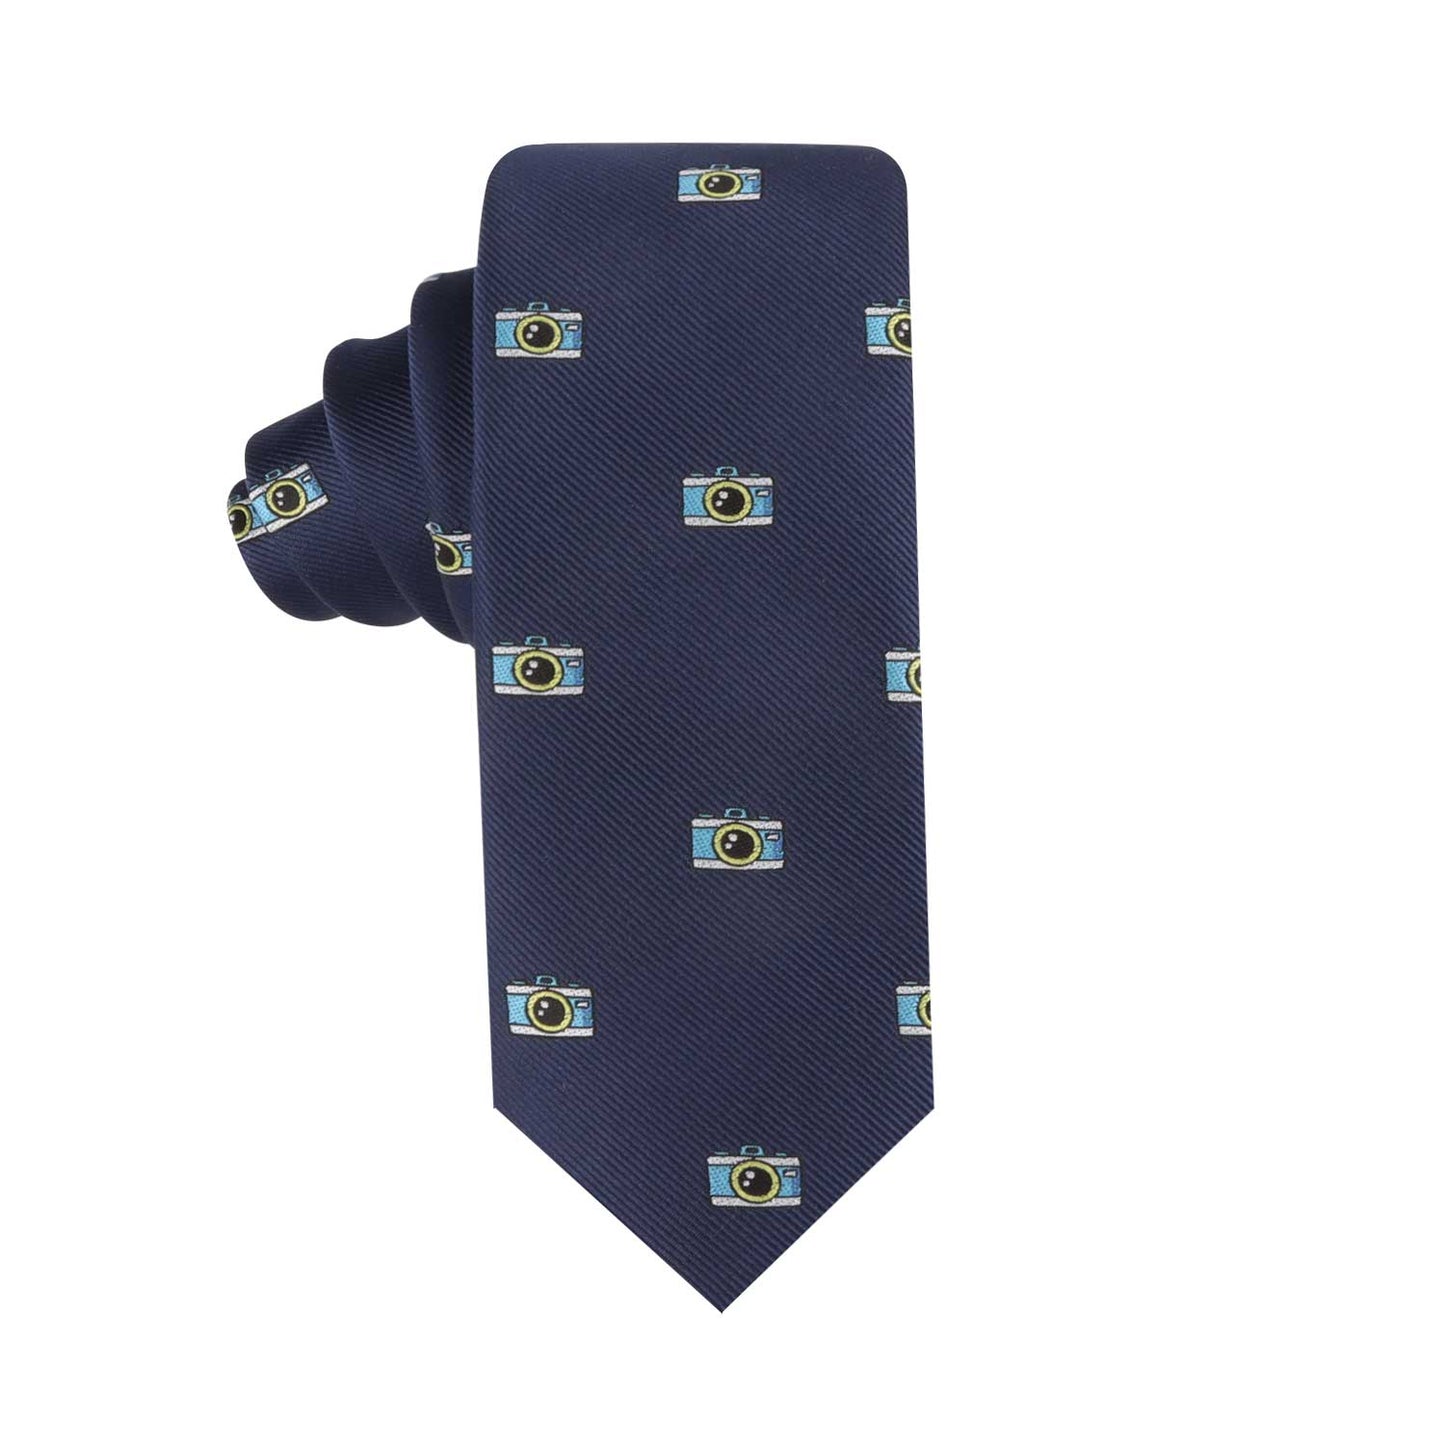 A Camera Skinny Tie with a blue and yellow design that captures attention.